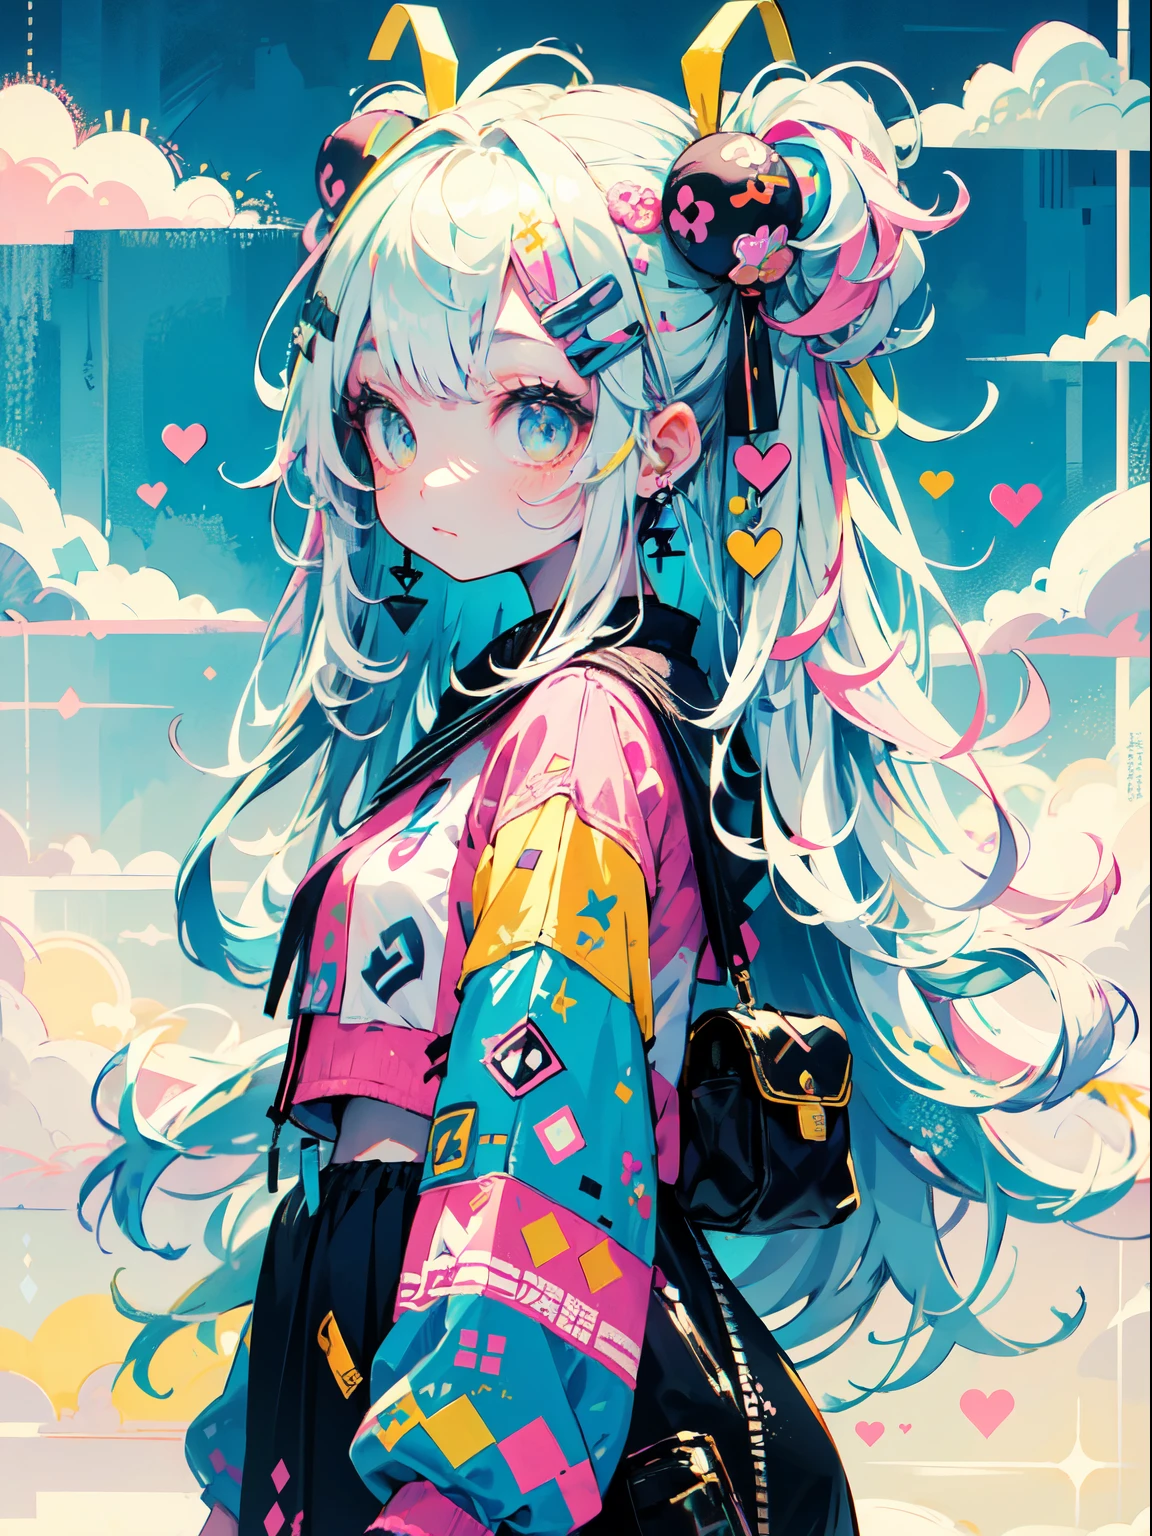 "kawaii, Cute, Adorable girl in pink, yellow, and baby blue color scheme. She wears sky-themed clothing with clouds and sky motifs. Her outfit is fluffy and soft, With decora accessories like hair clips. She embodies a vibrant and trendy Harajuku fashion style."